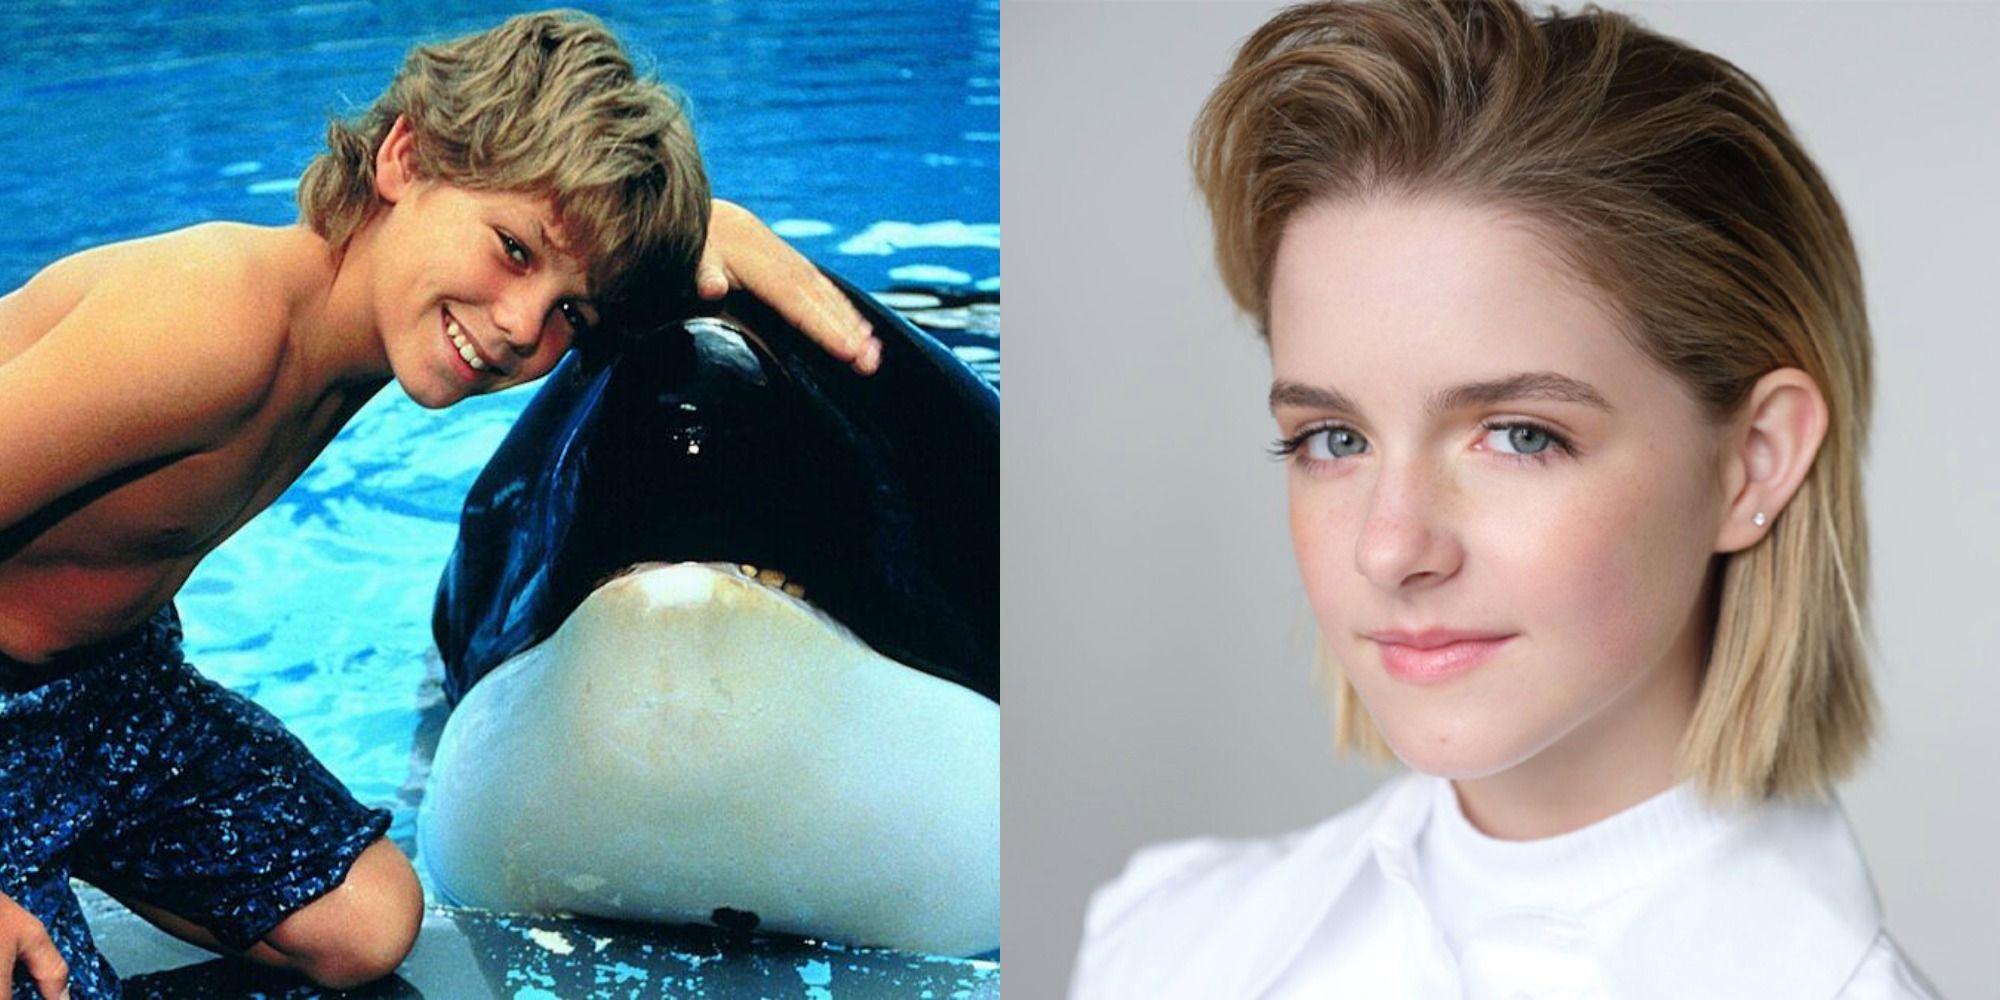 Split image showing Jesse and Willy from Free Willy, and actor McKenna Grace